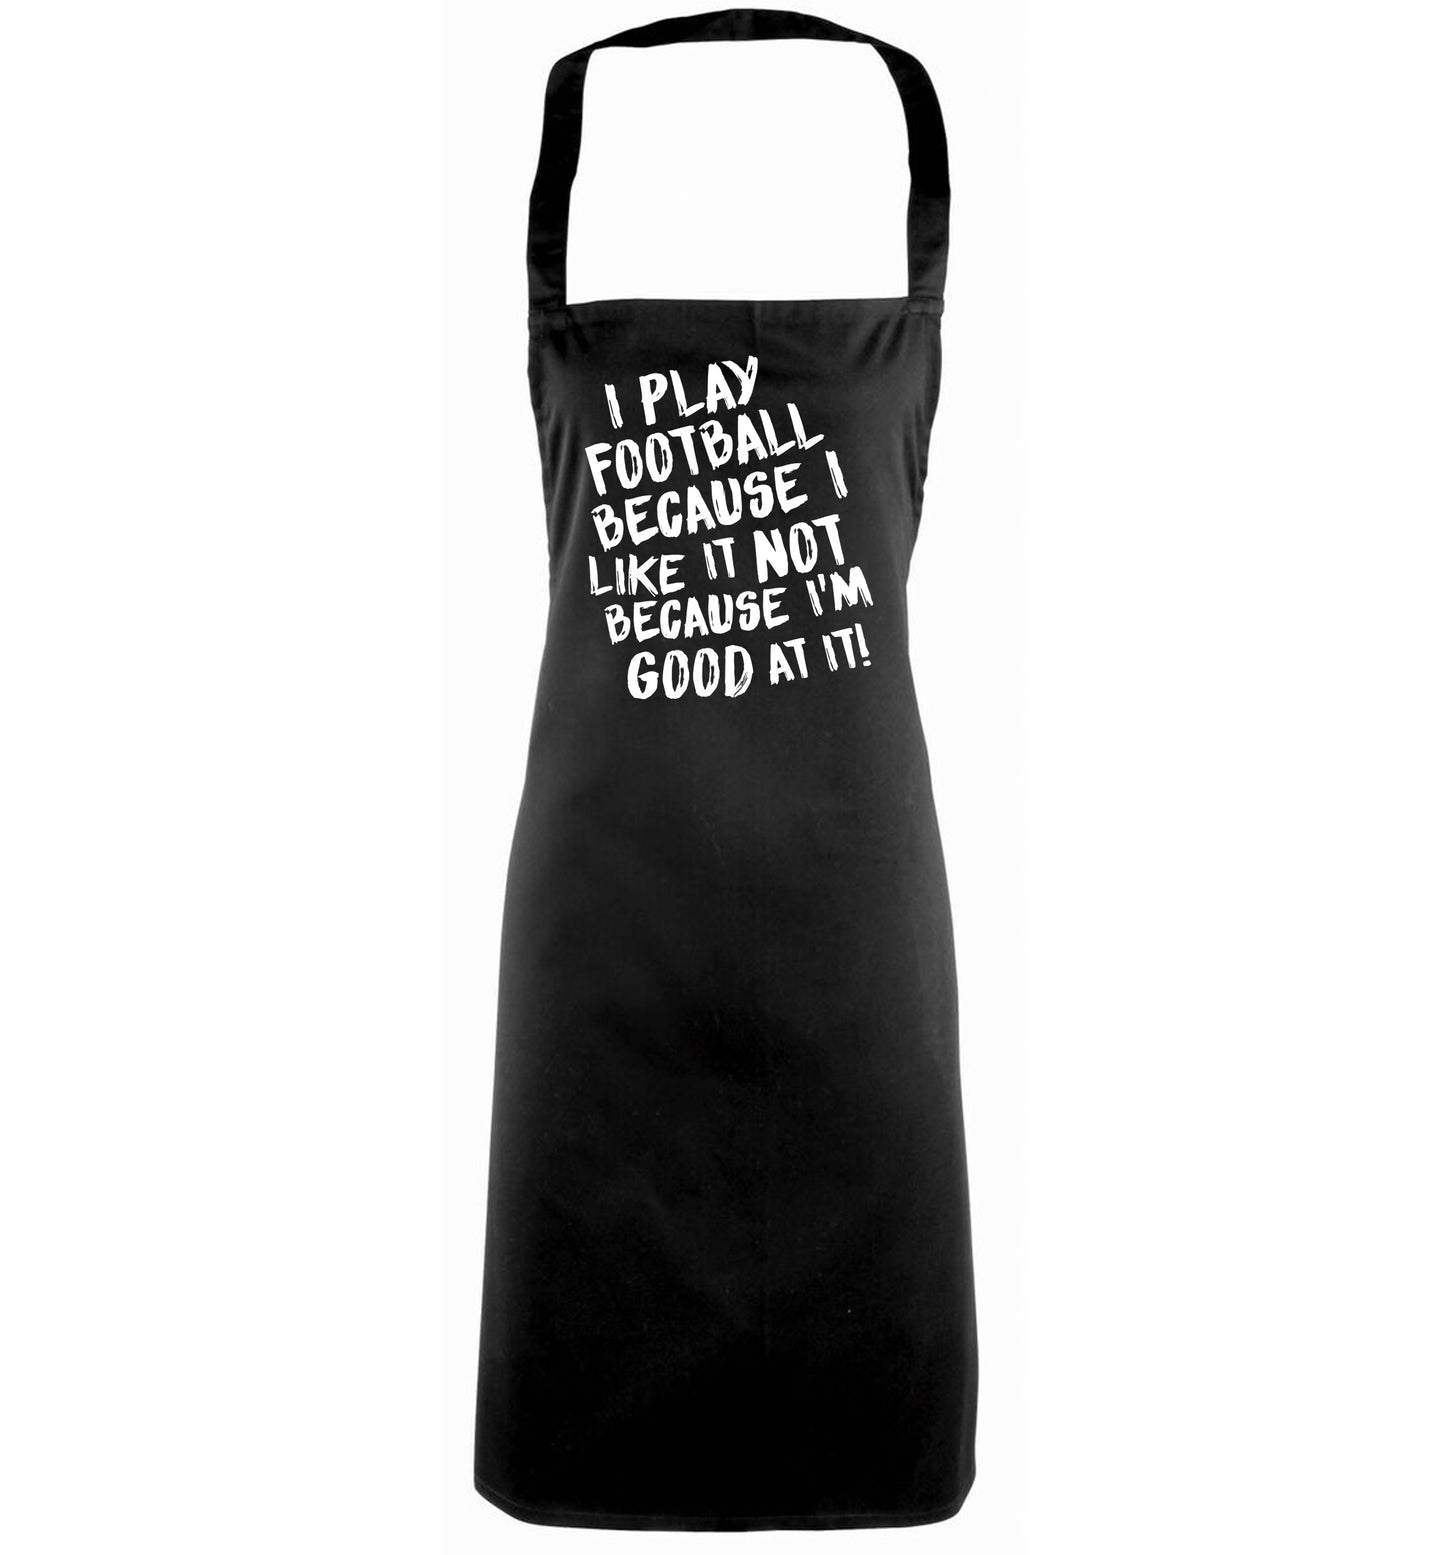 I play football because I like it not because I'm good at it black apron